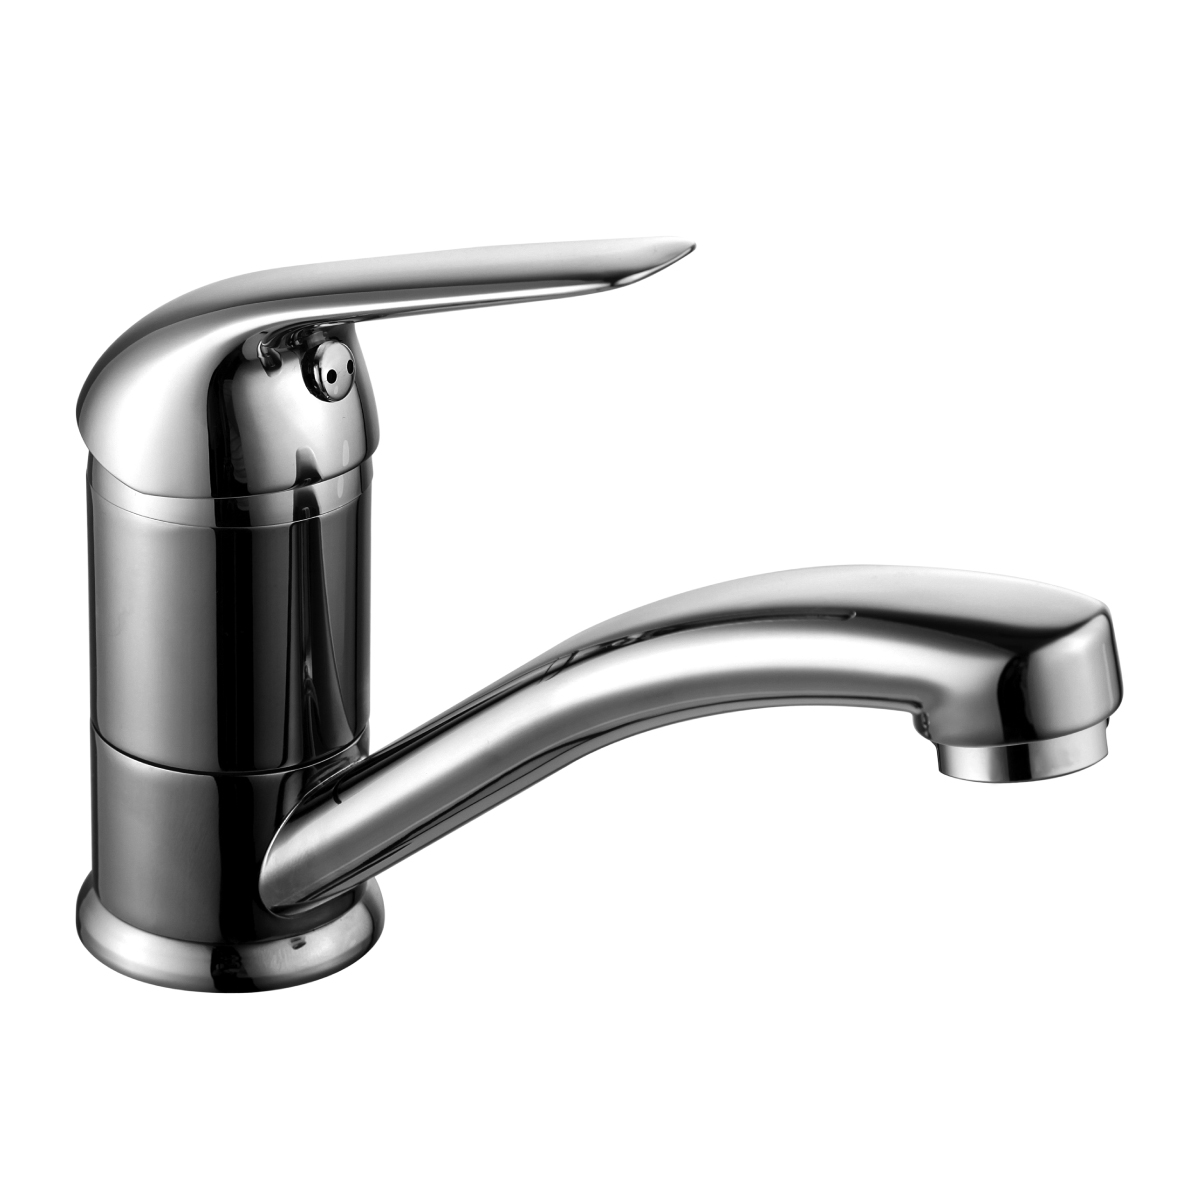 LM1207C Washbasin faucet
with swivel spout